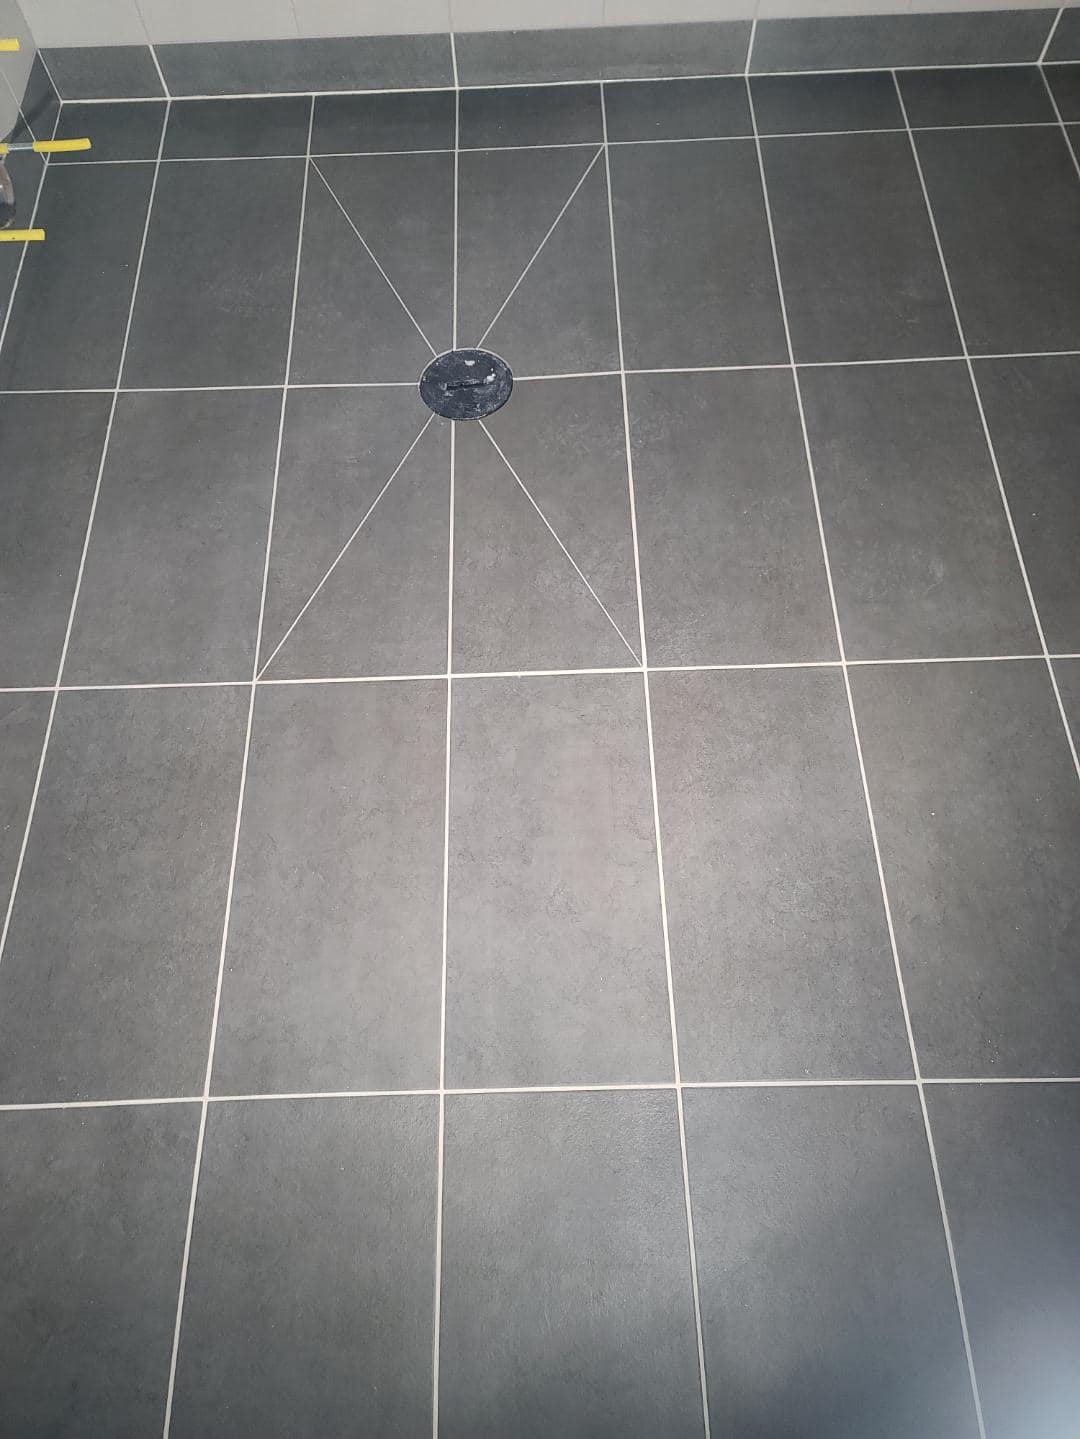 Precise installation of drain, with detail cuts of tiles in the floor by Cardinal Flooring and Supply of Klamath Falls and Medford. Southern Oregon.